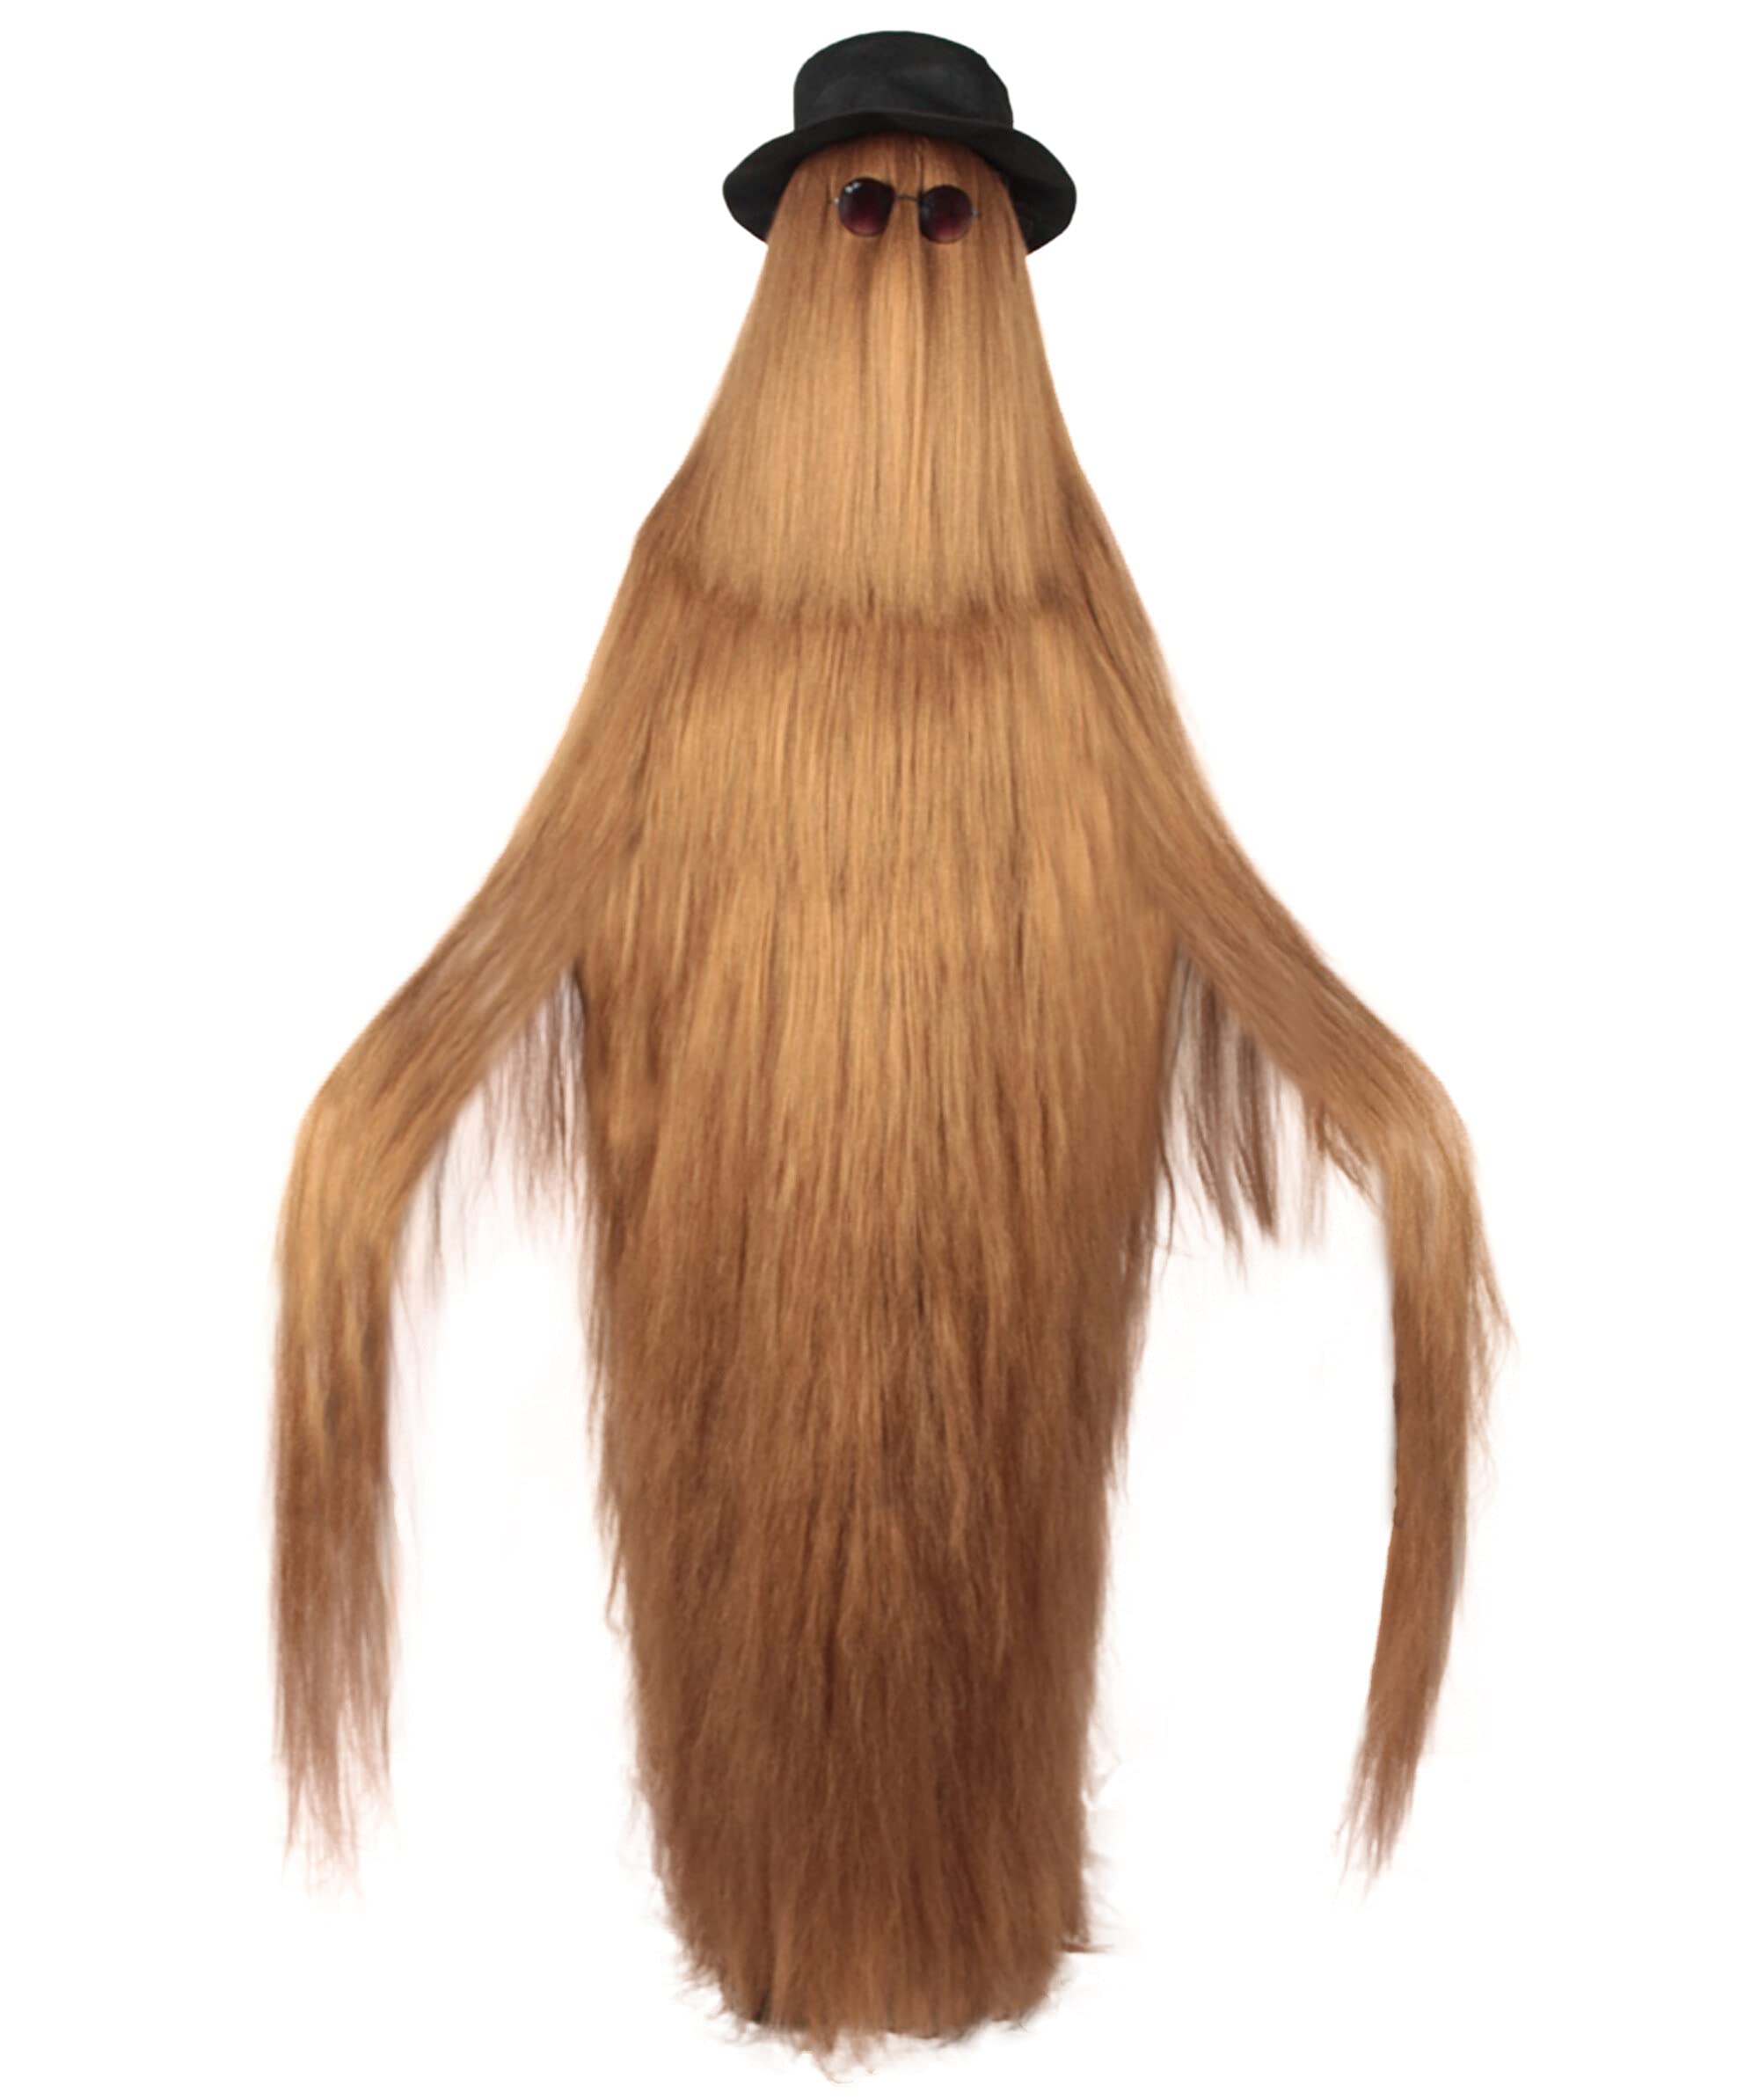 HPO Adult Unisex Cousin Itt Addams Family Dapper Creature Monster Halloween Costume, Synthetic Fiber, Brown - image 1 of 9